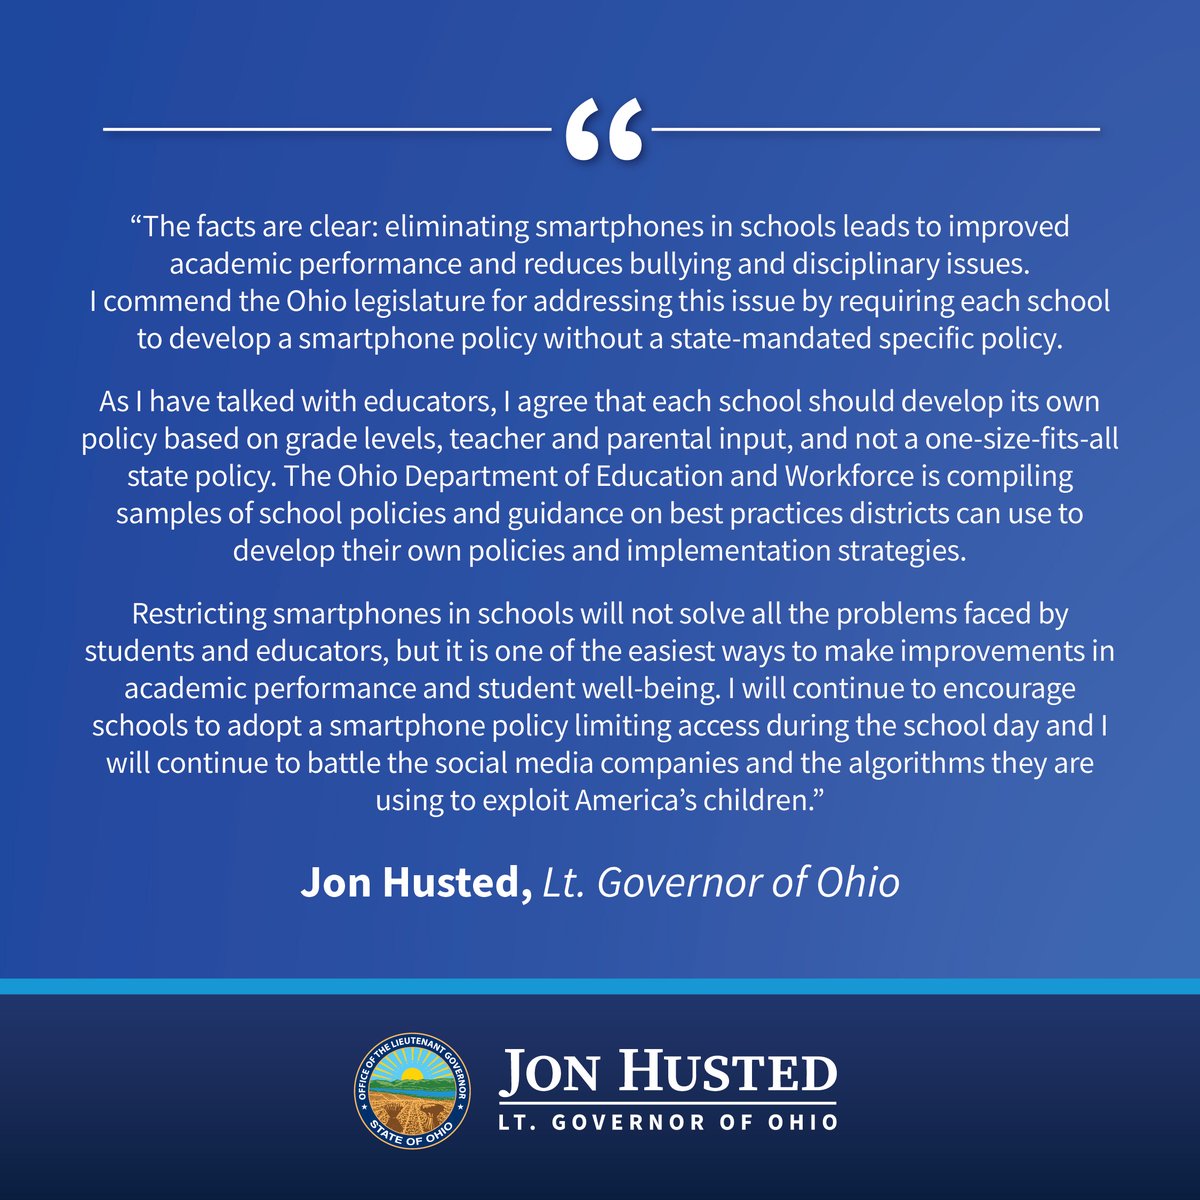 Lt. Governor @JonHusted released the following statement upon the passage of House Bill 250 this afternoon: